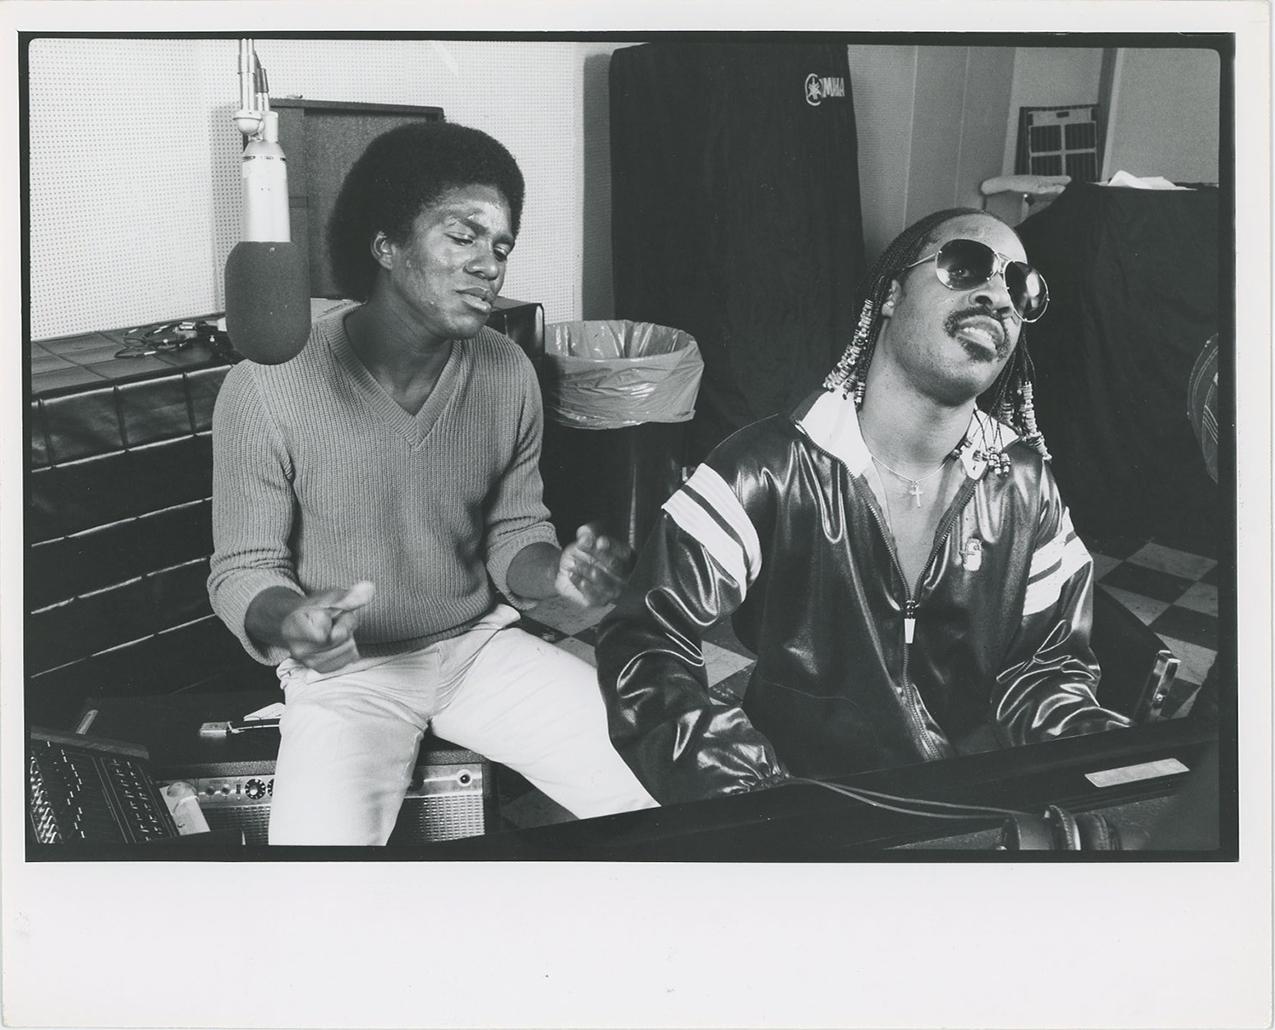 Unknown Black and White Photograph - Stevie Wonder and Jermaine Jackson in the Studio Together in 1980